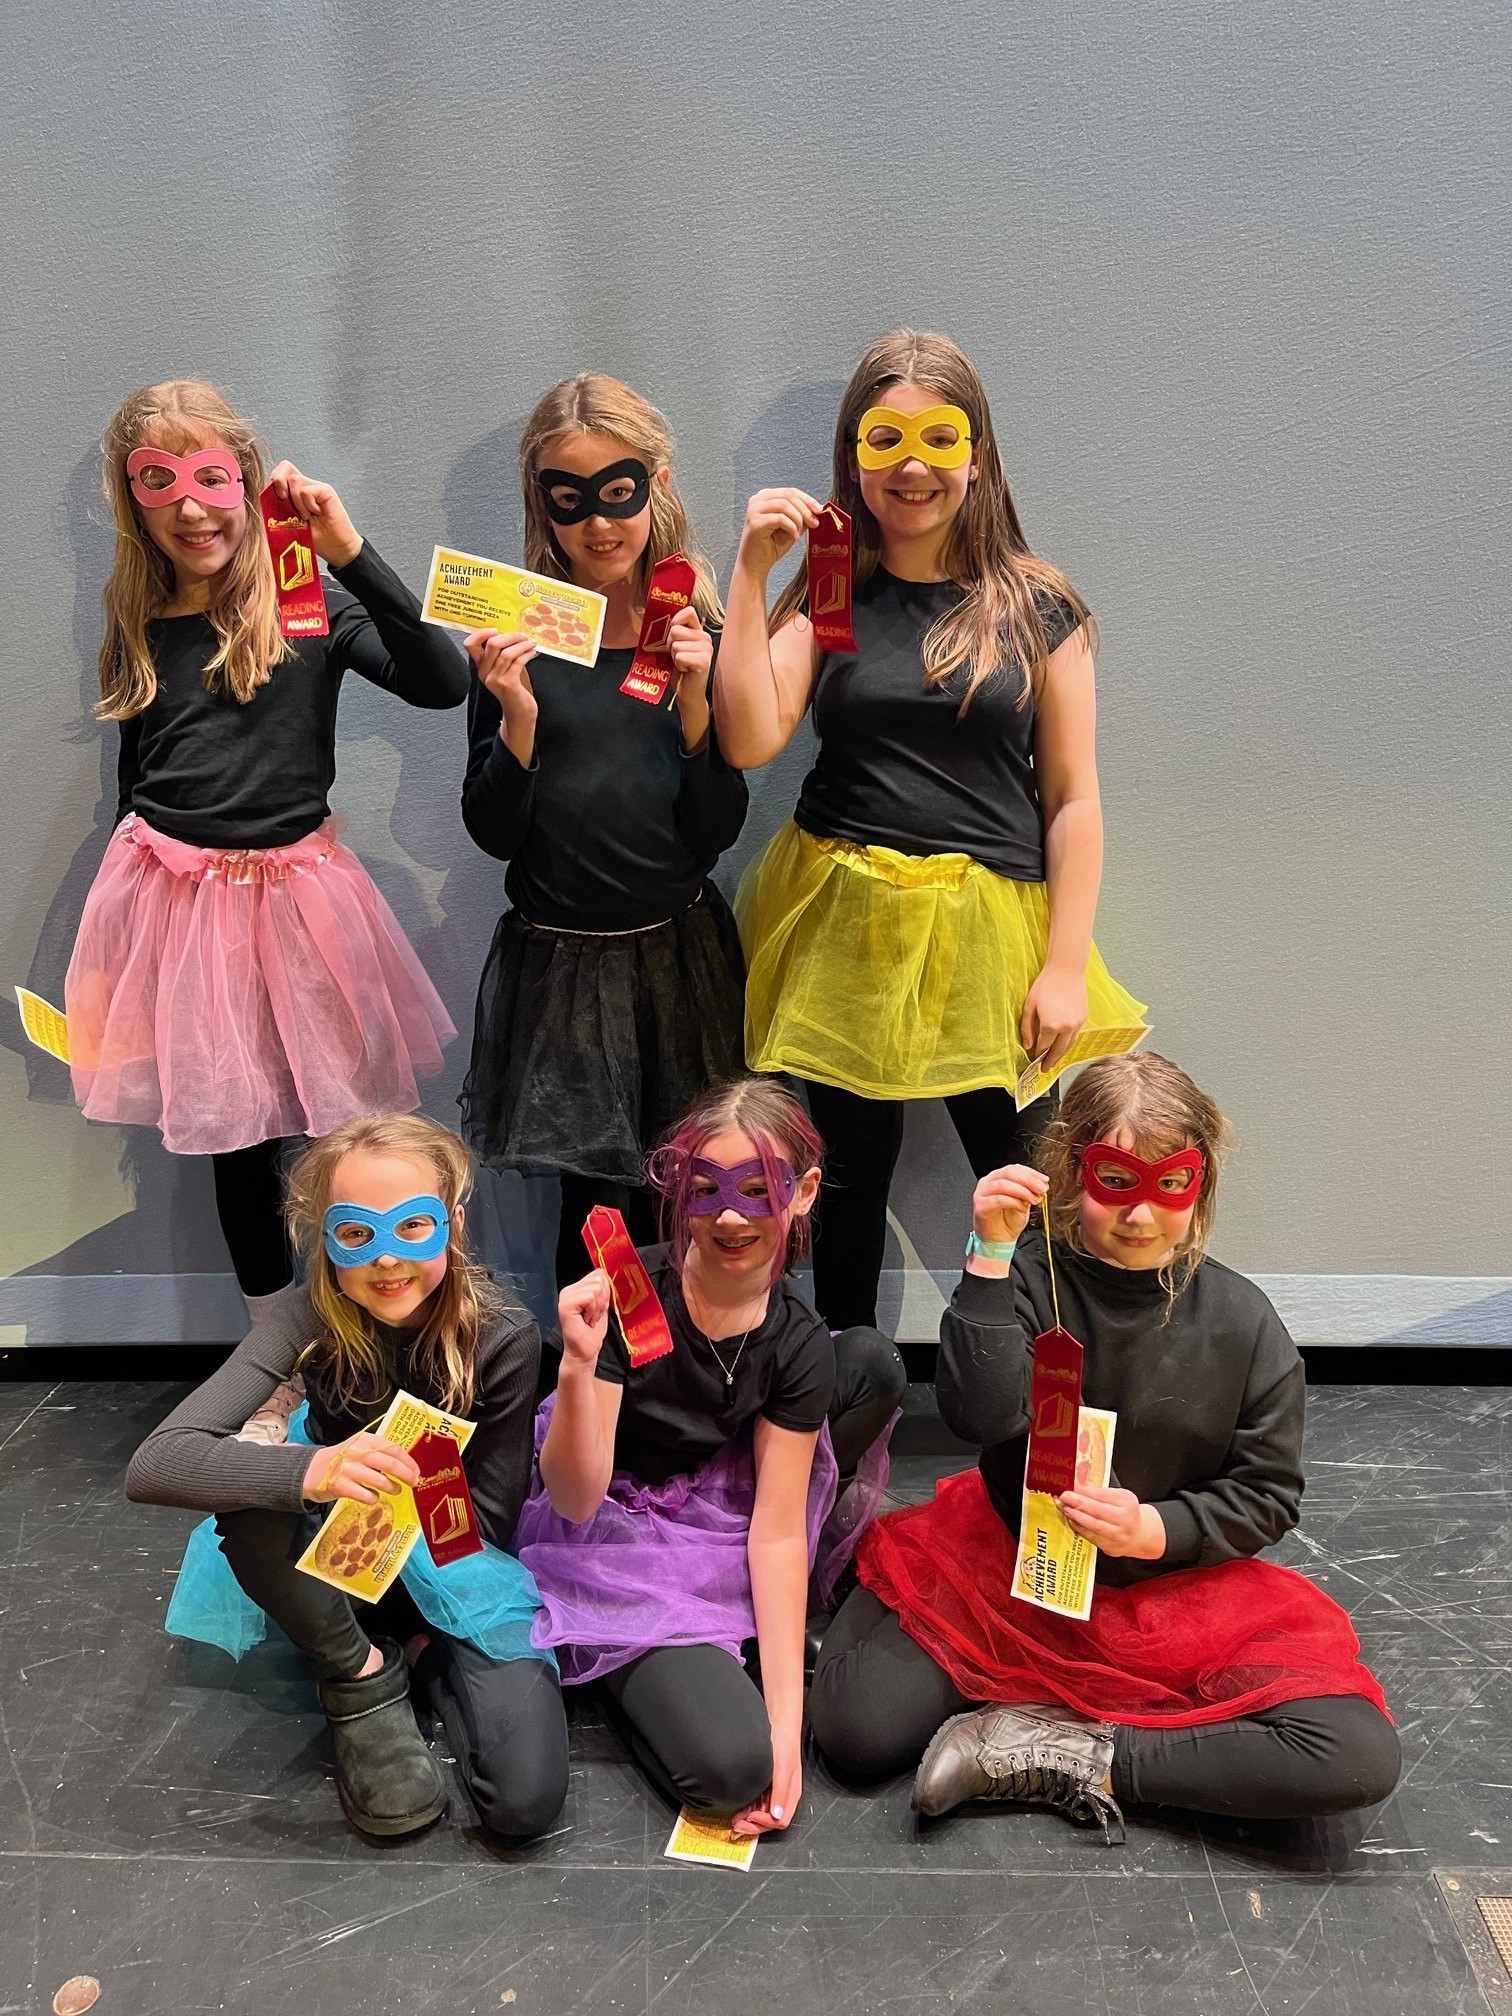 Best Team Name winners. Six girls in black shirts, different colored tutus and bandit masks.